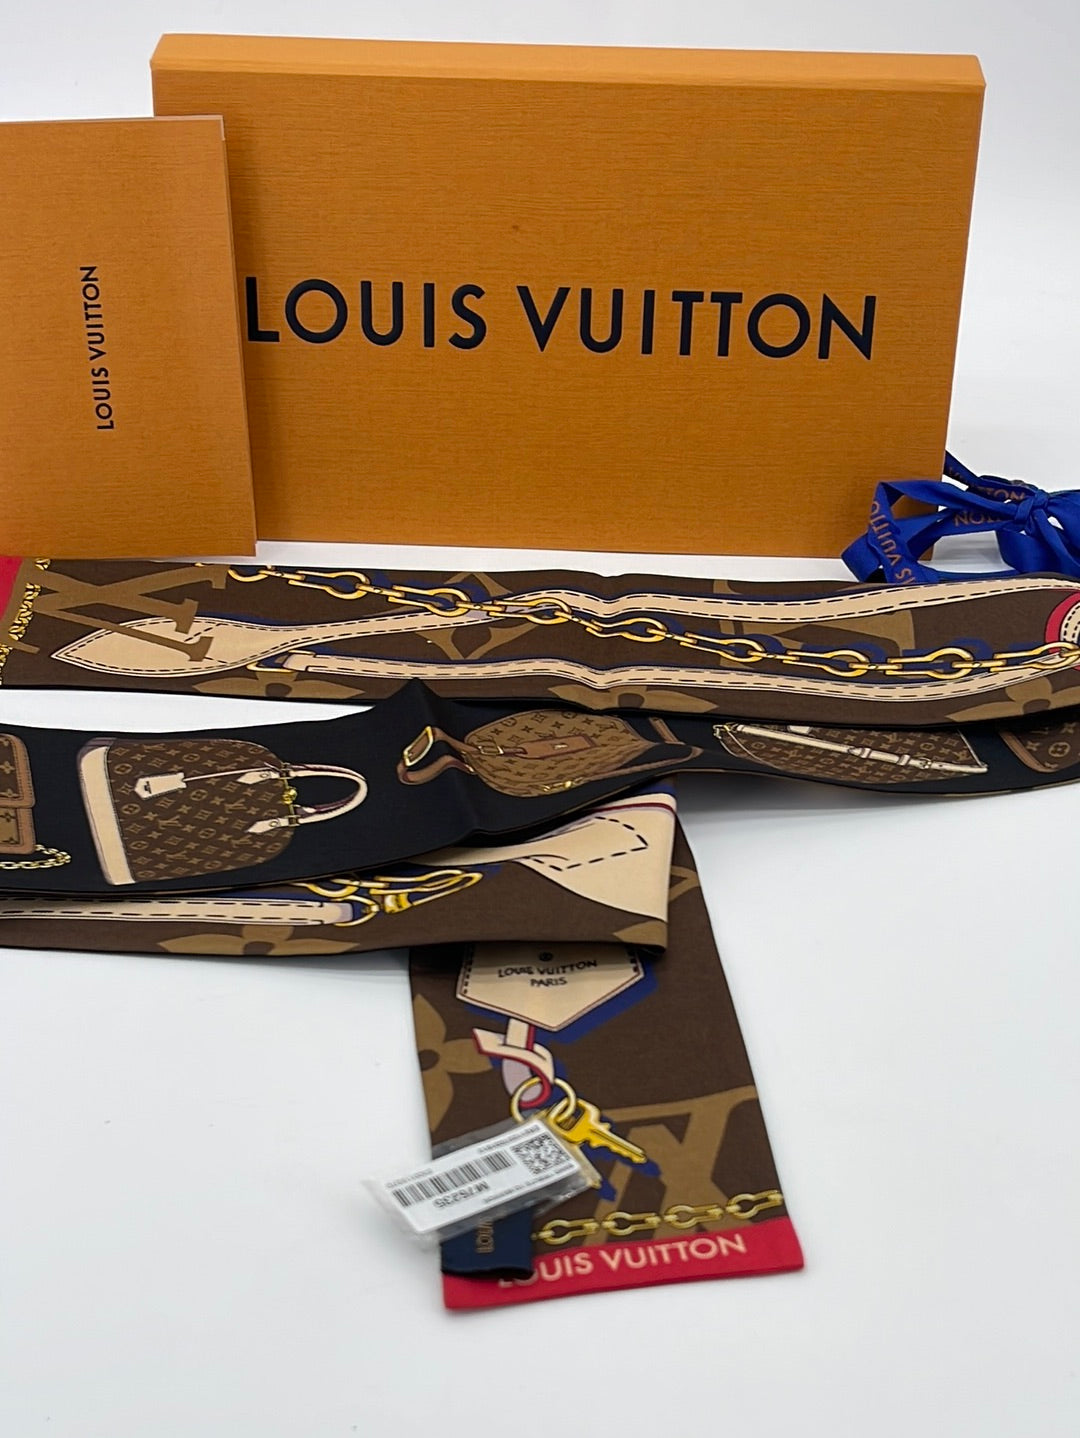 AUTHENTIC LOUIS VUITTON BANDEAU SCARF MONOGRAM ! NEW WITH TAG!